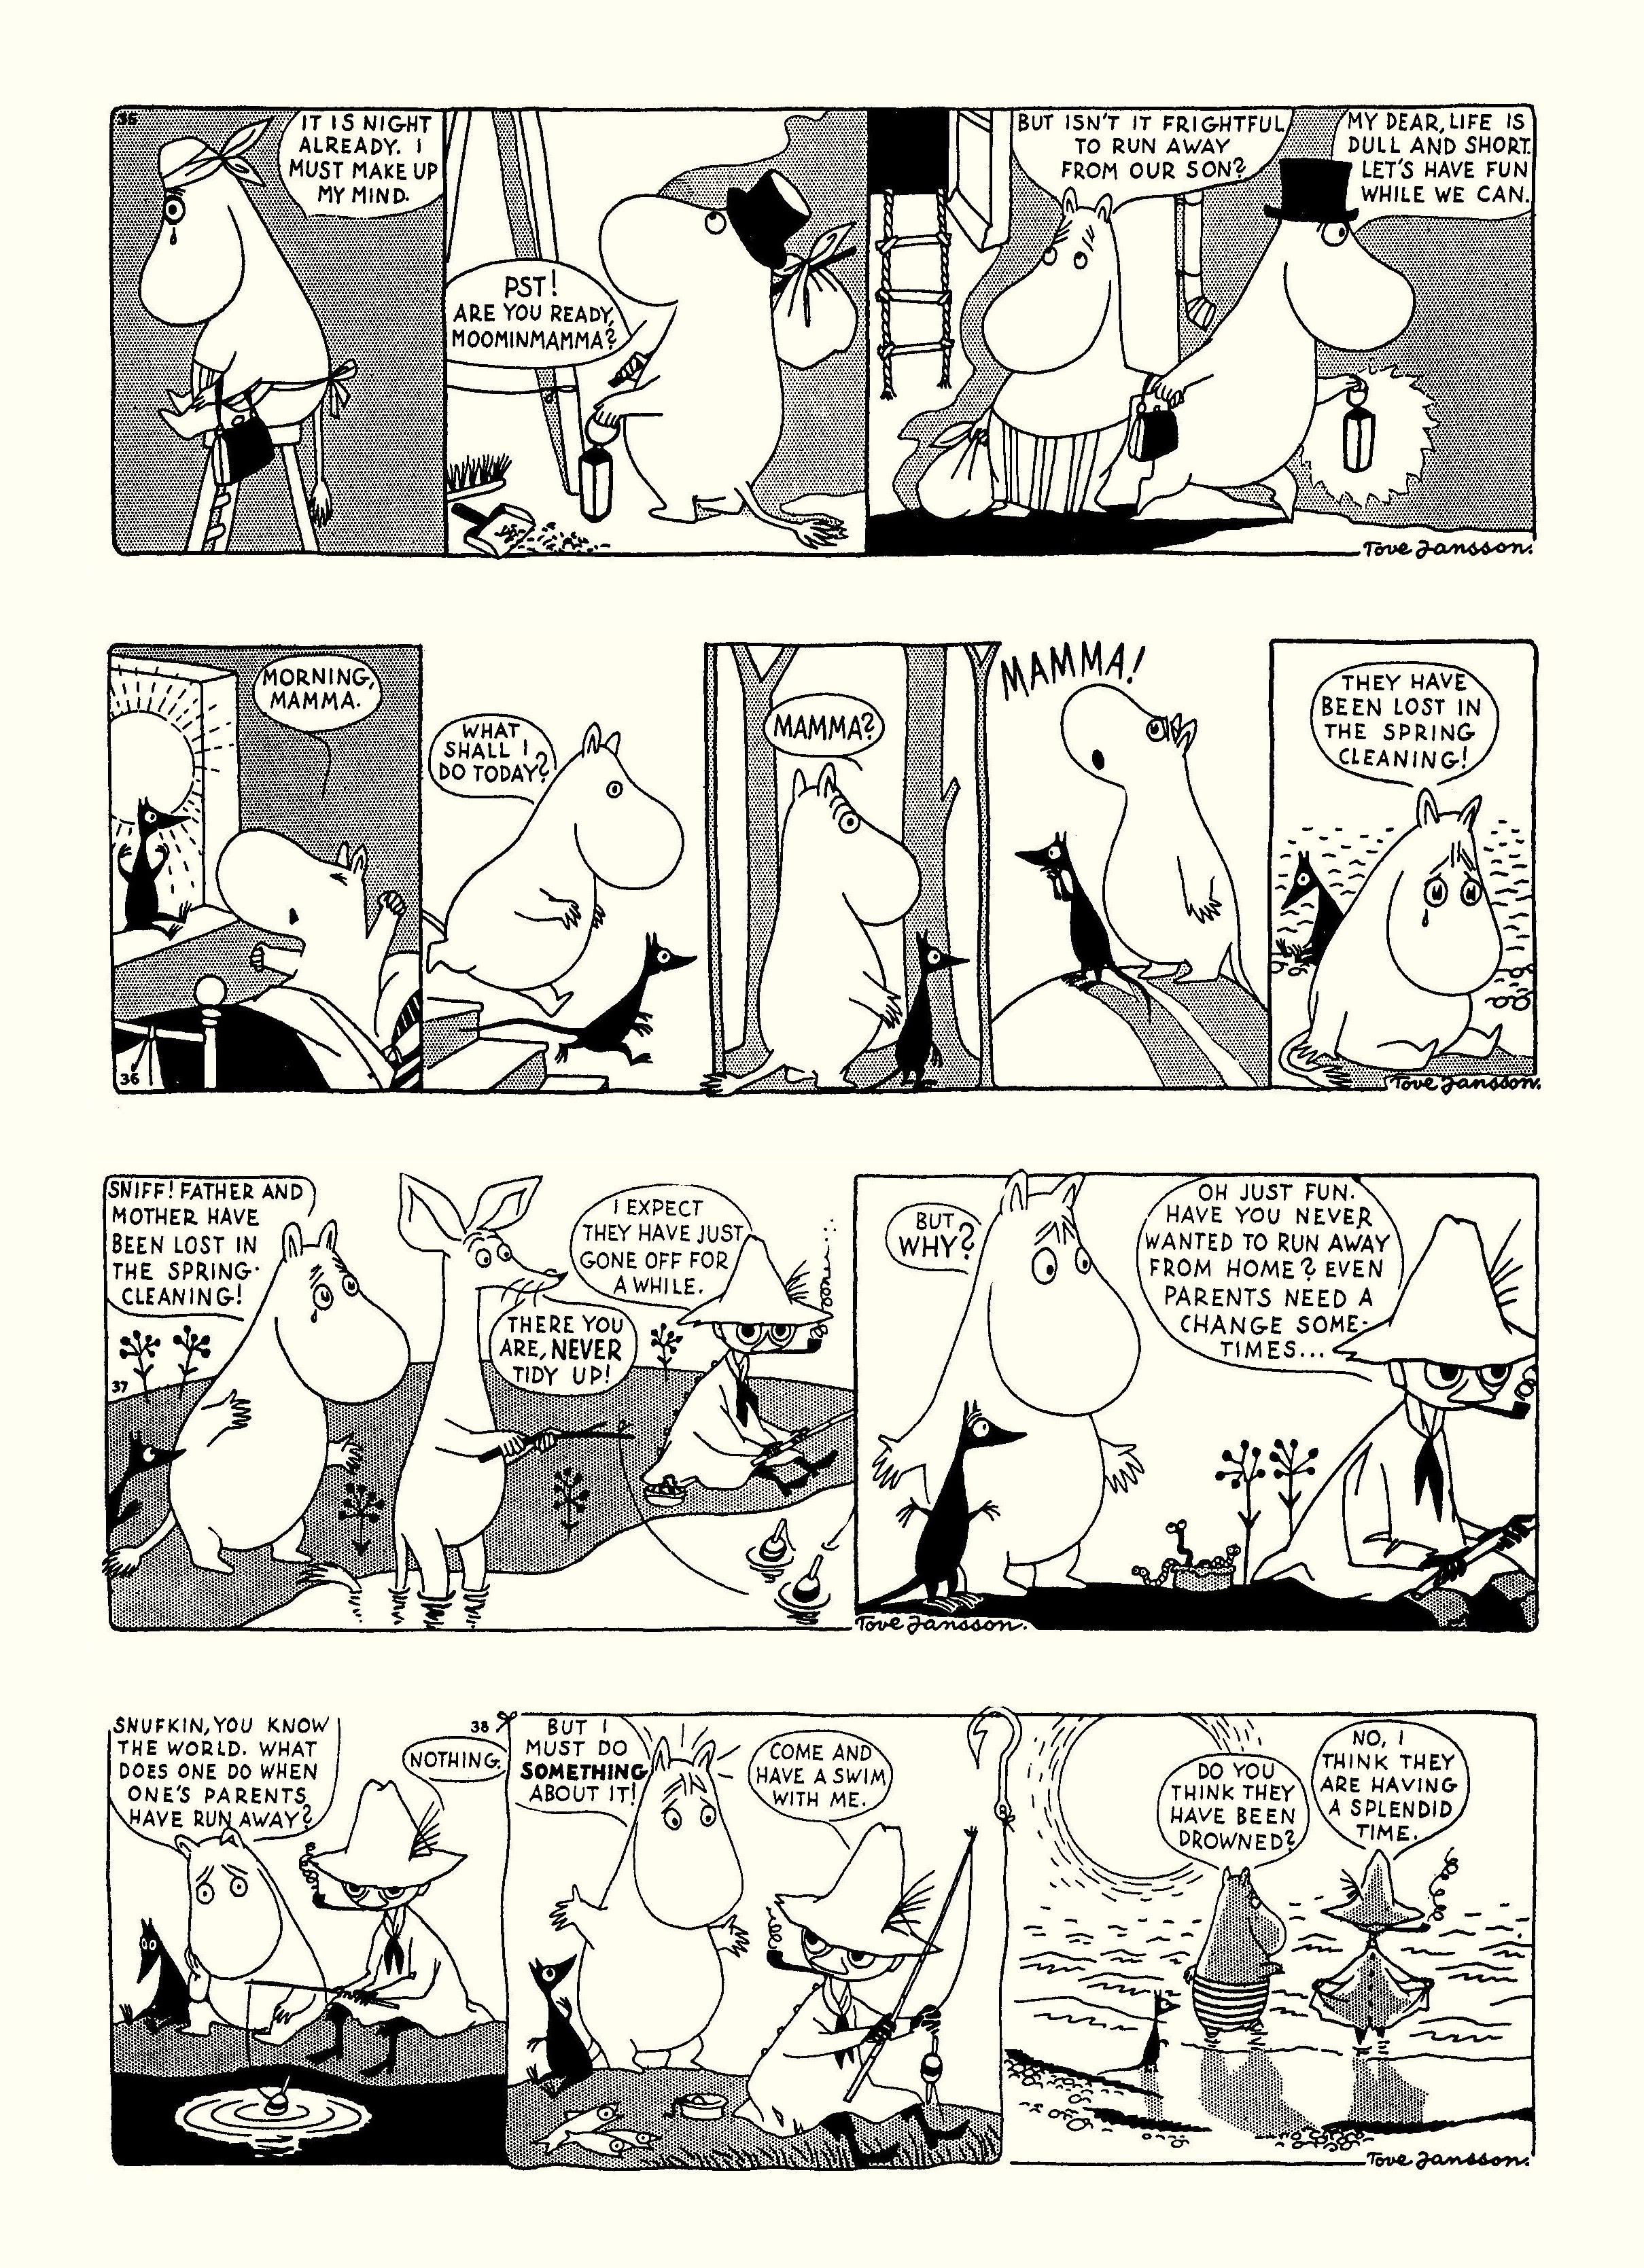 Read online Moomin: The Complete Tove Jansson Comic Strip comic -  Issue # TPB 1 - 39